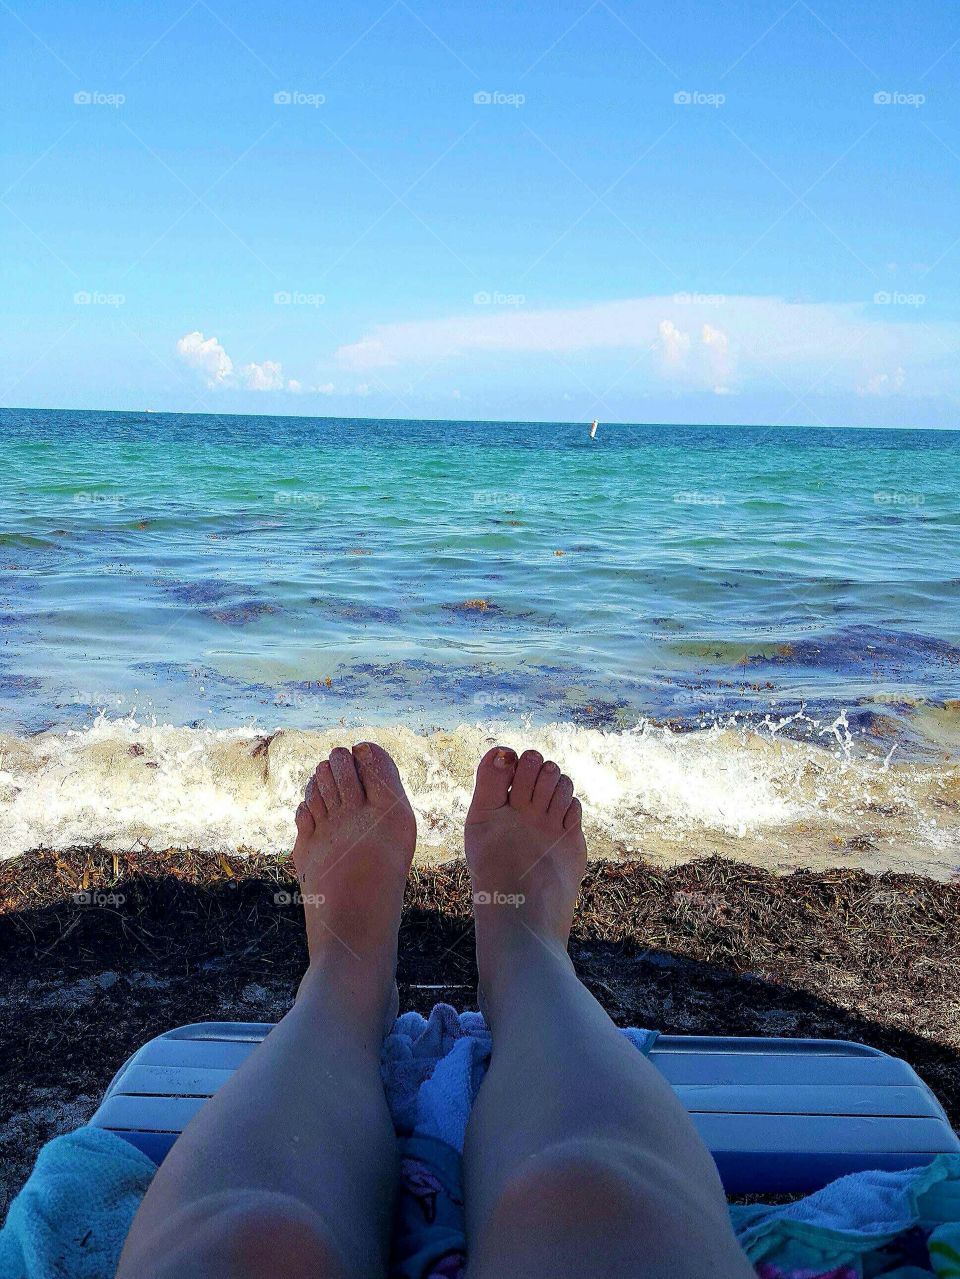 Feet near the Ocean. On vacation in Florida relaxing